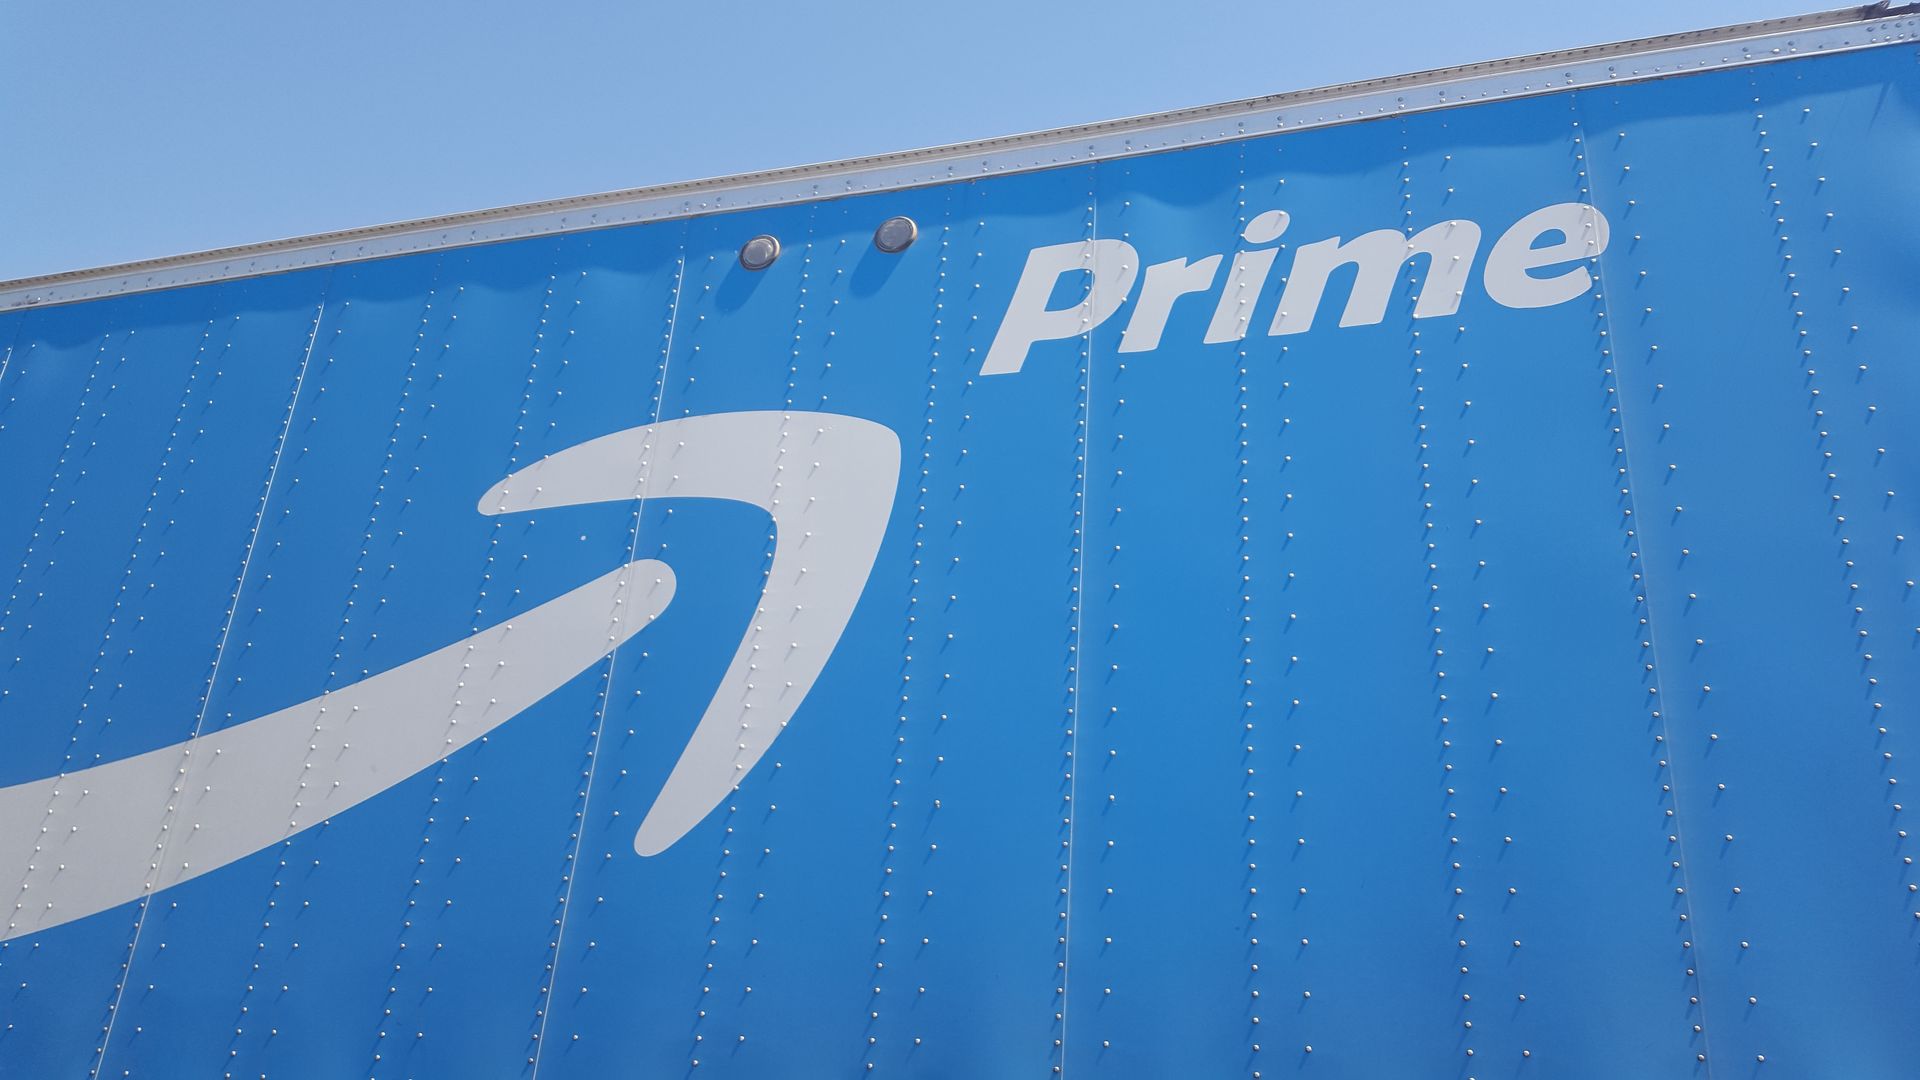 The side of a semi truck that says "prime"